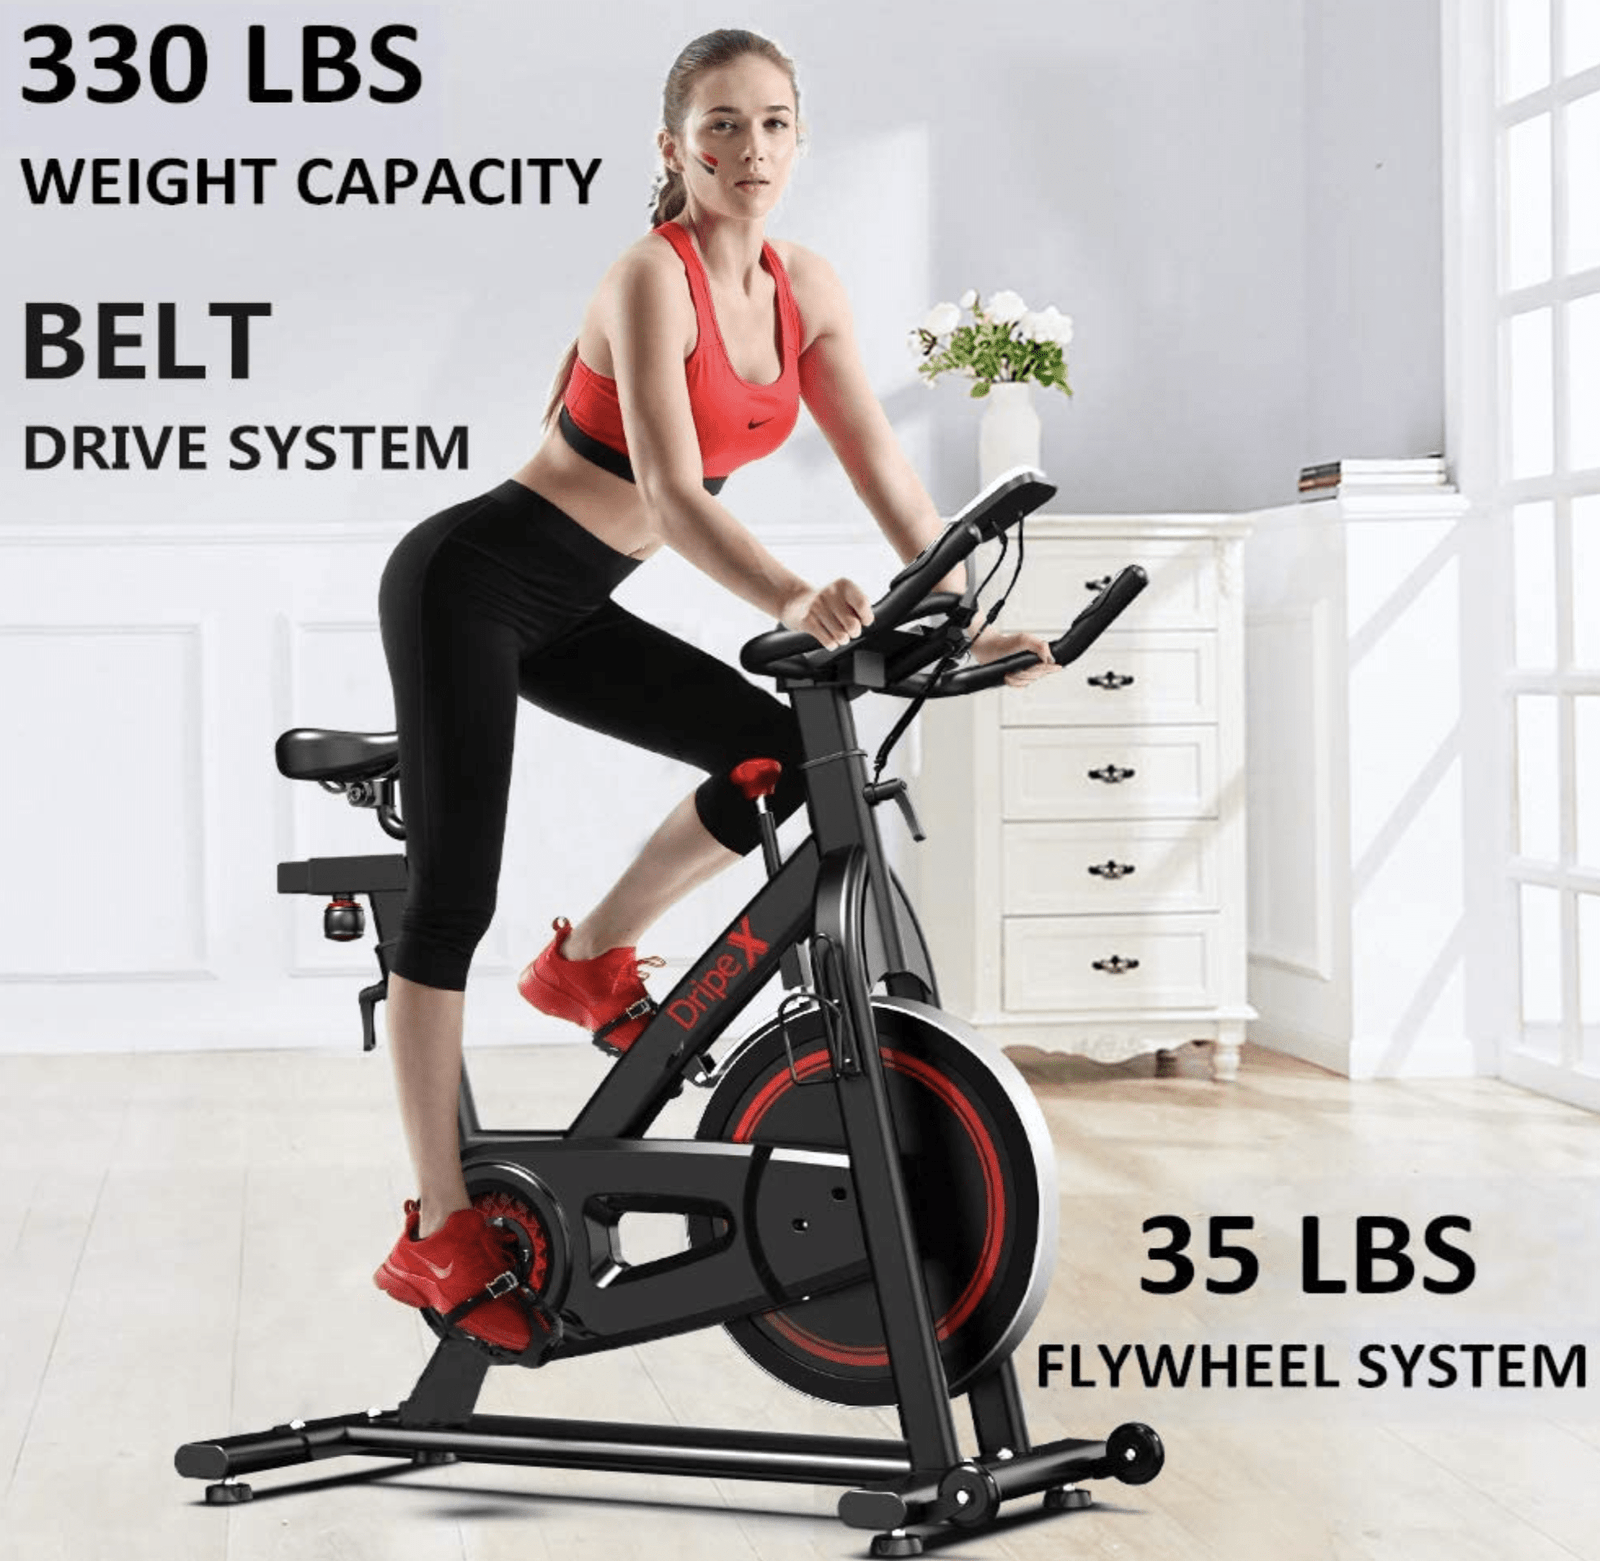 Top 10 Fitness Exercise Bikes of 2022 - Fitnesscart